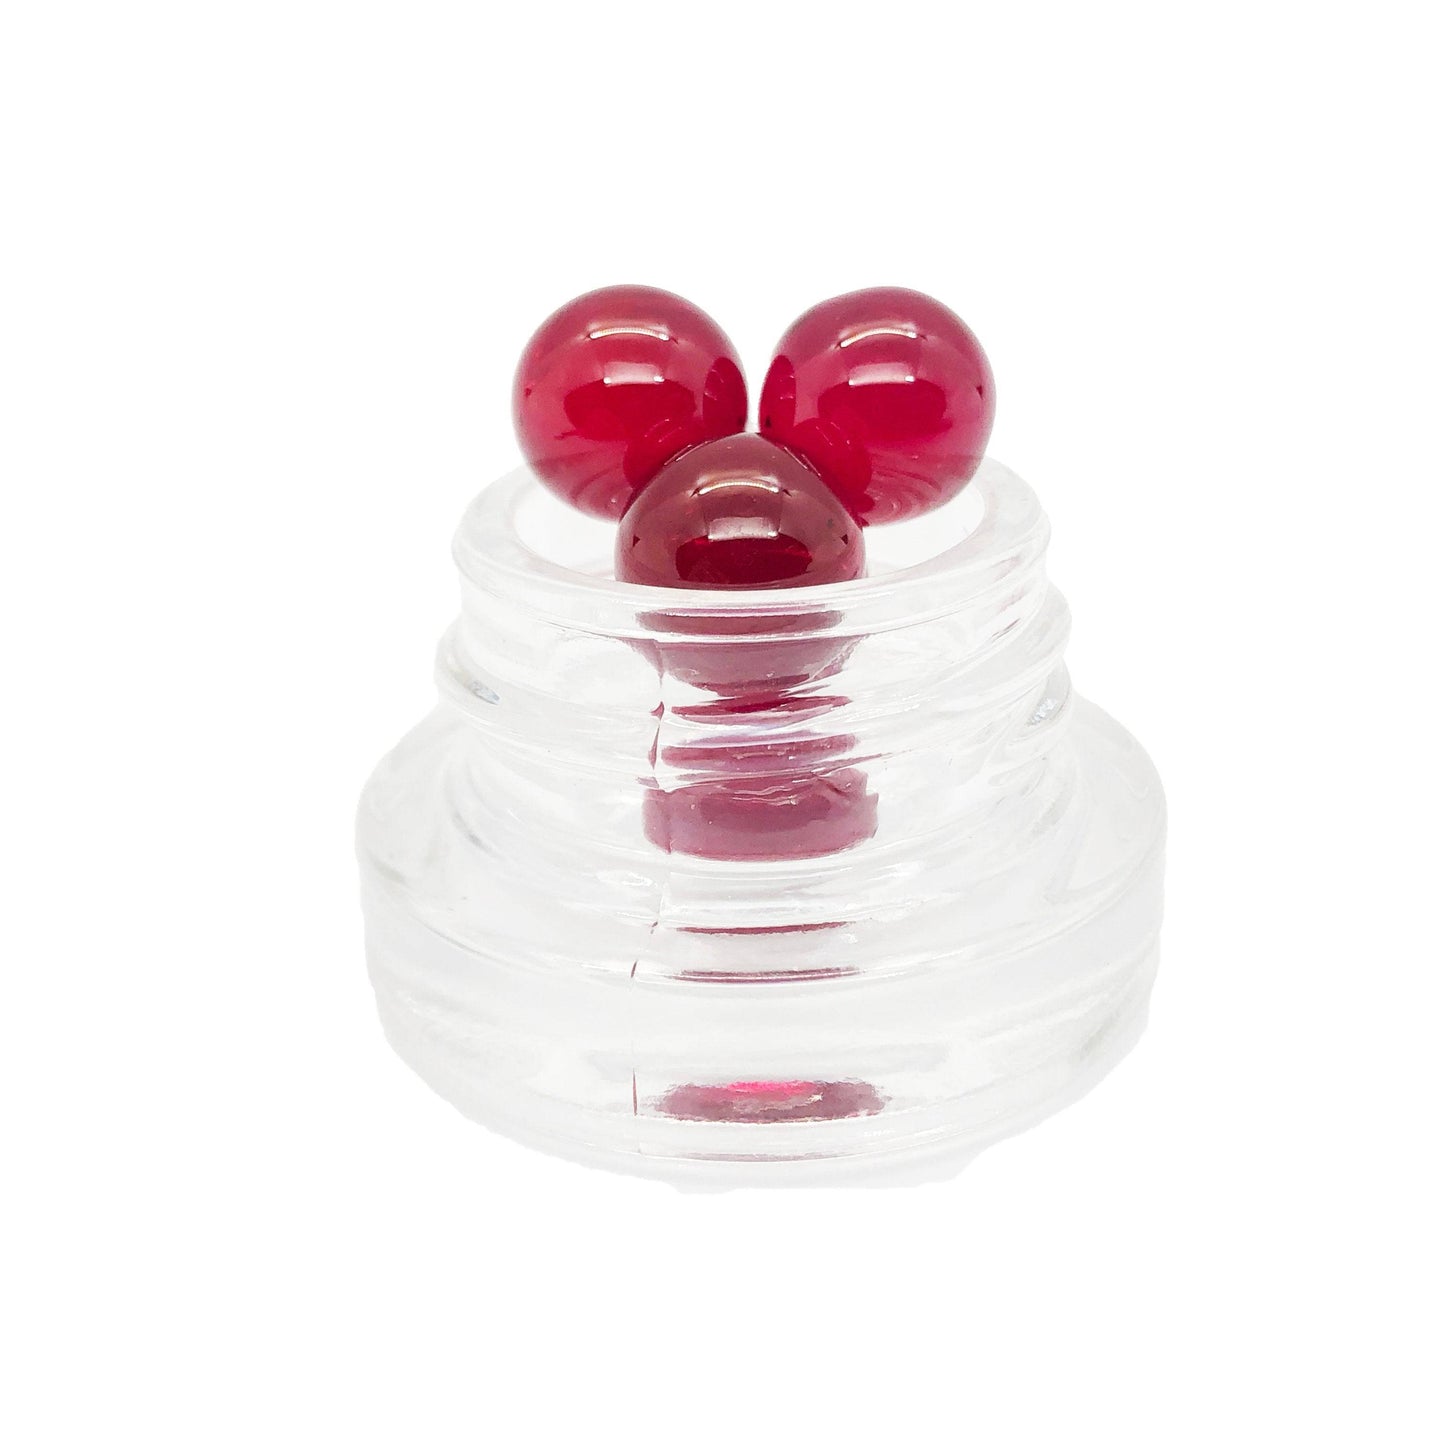 Ruby Pearls by Terp Pearlz 10mm-12mm valves for Slurpers - OPS.com